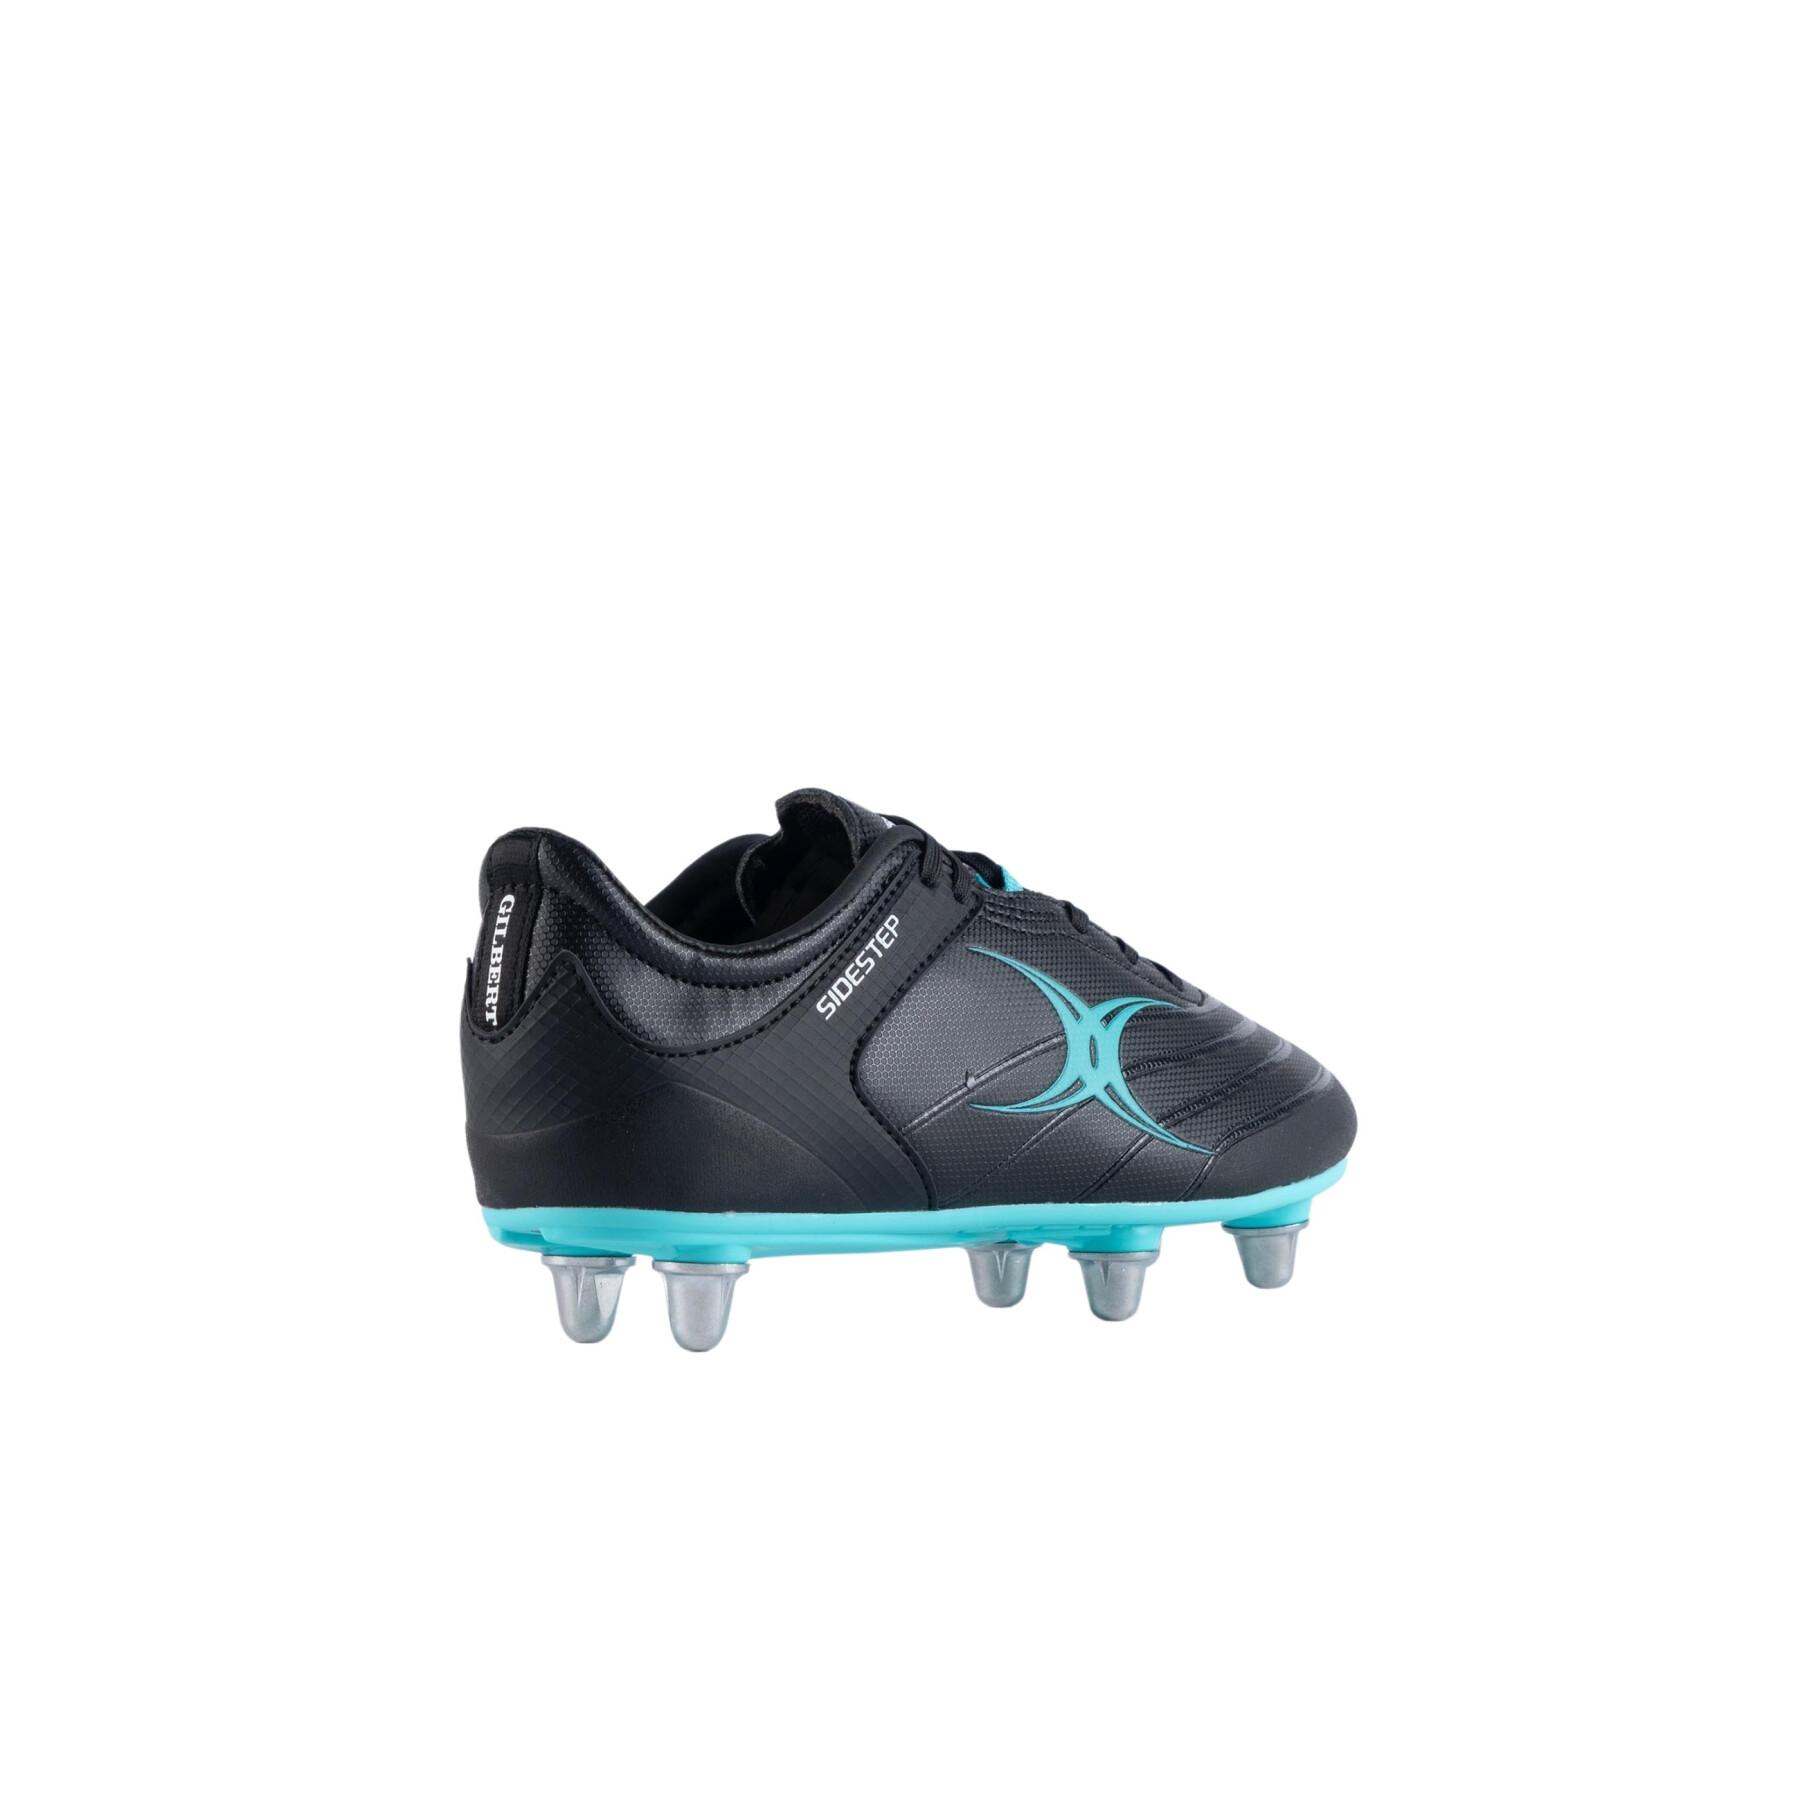 Kids rugby shoes Gilbert Sidestep X15 LO 6S